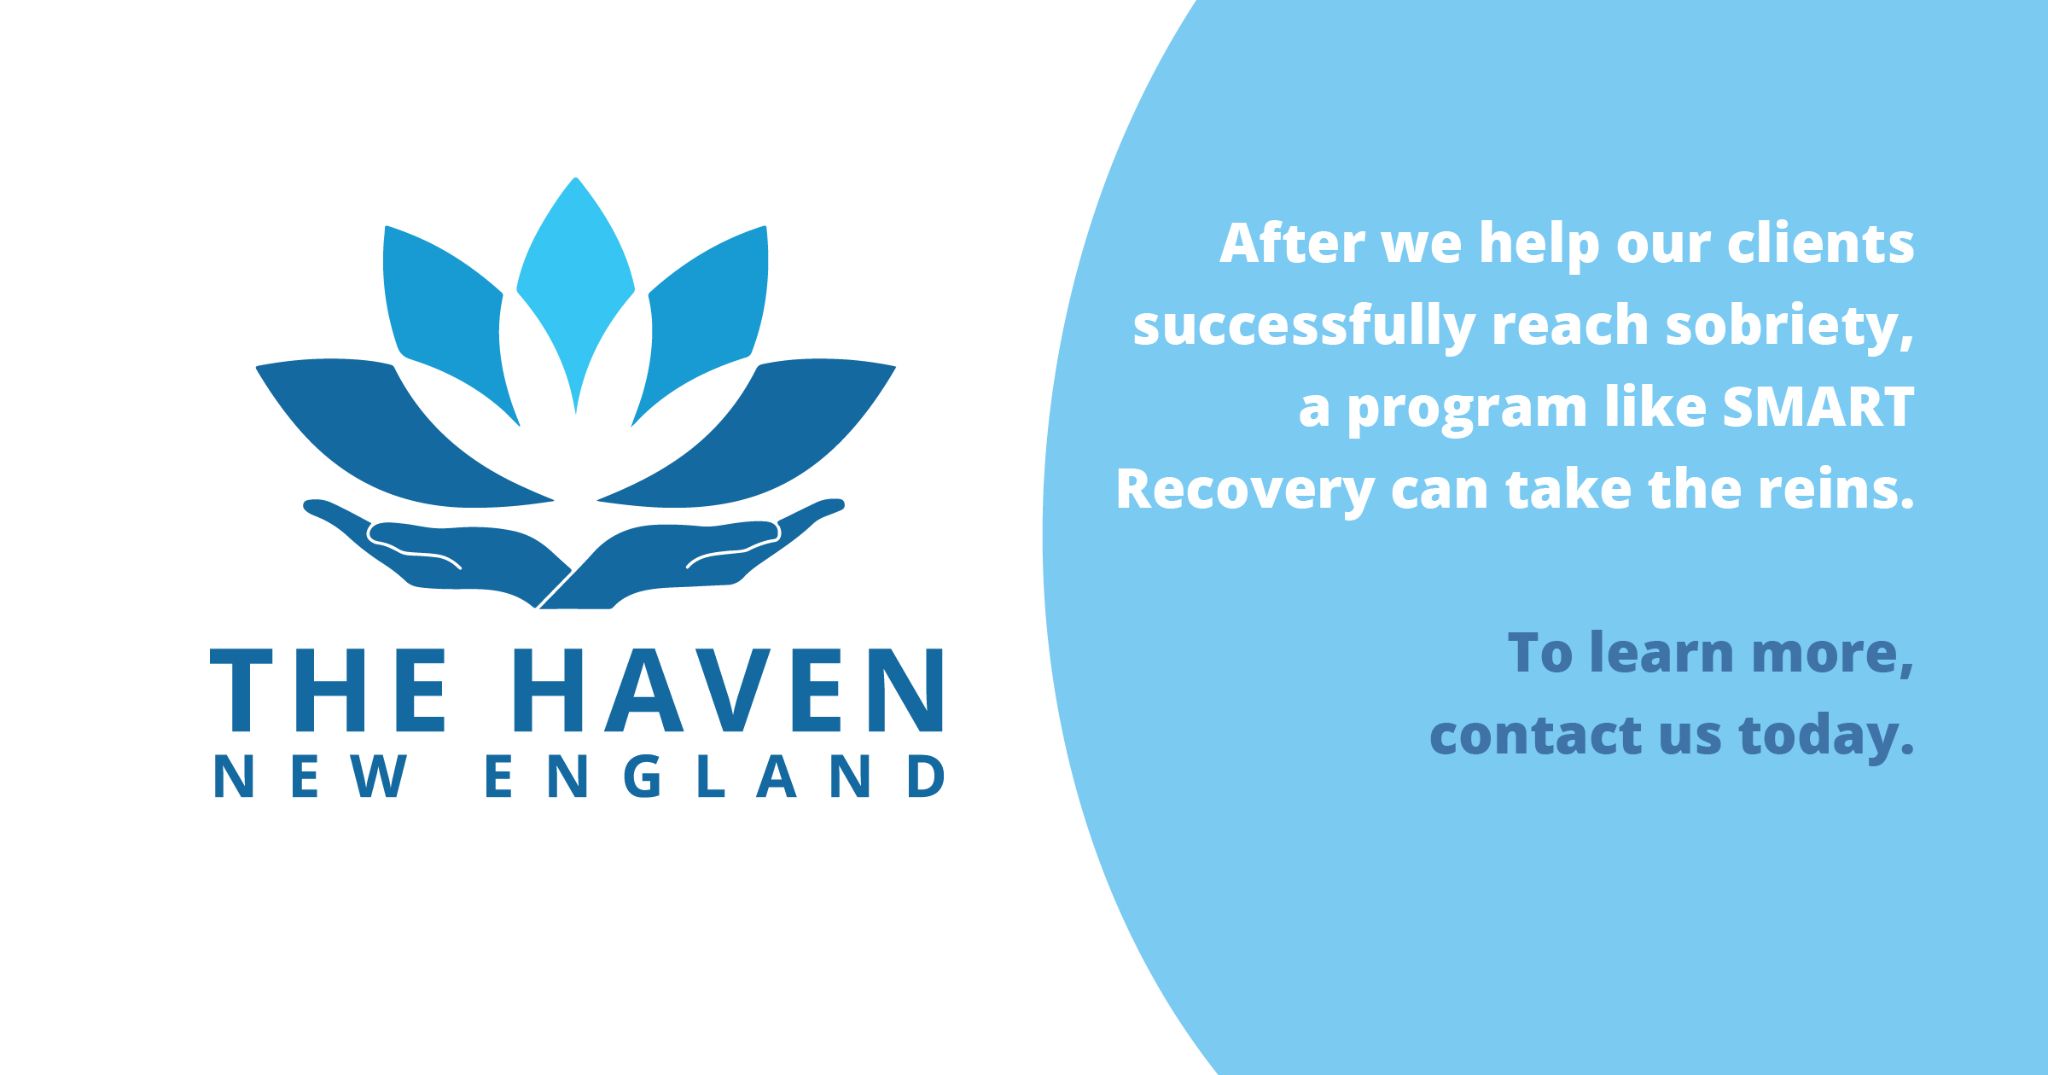 after we help our clients successfully reach sobriety a program like SMART recovery can take the reins. To learn more contact us today